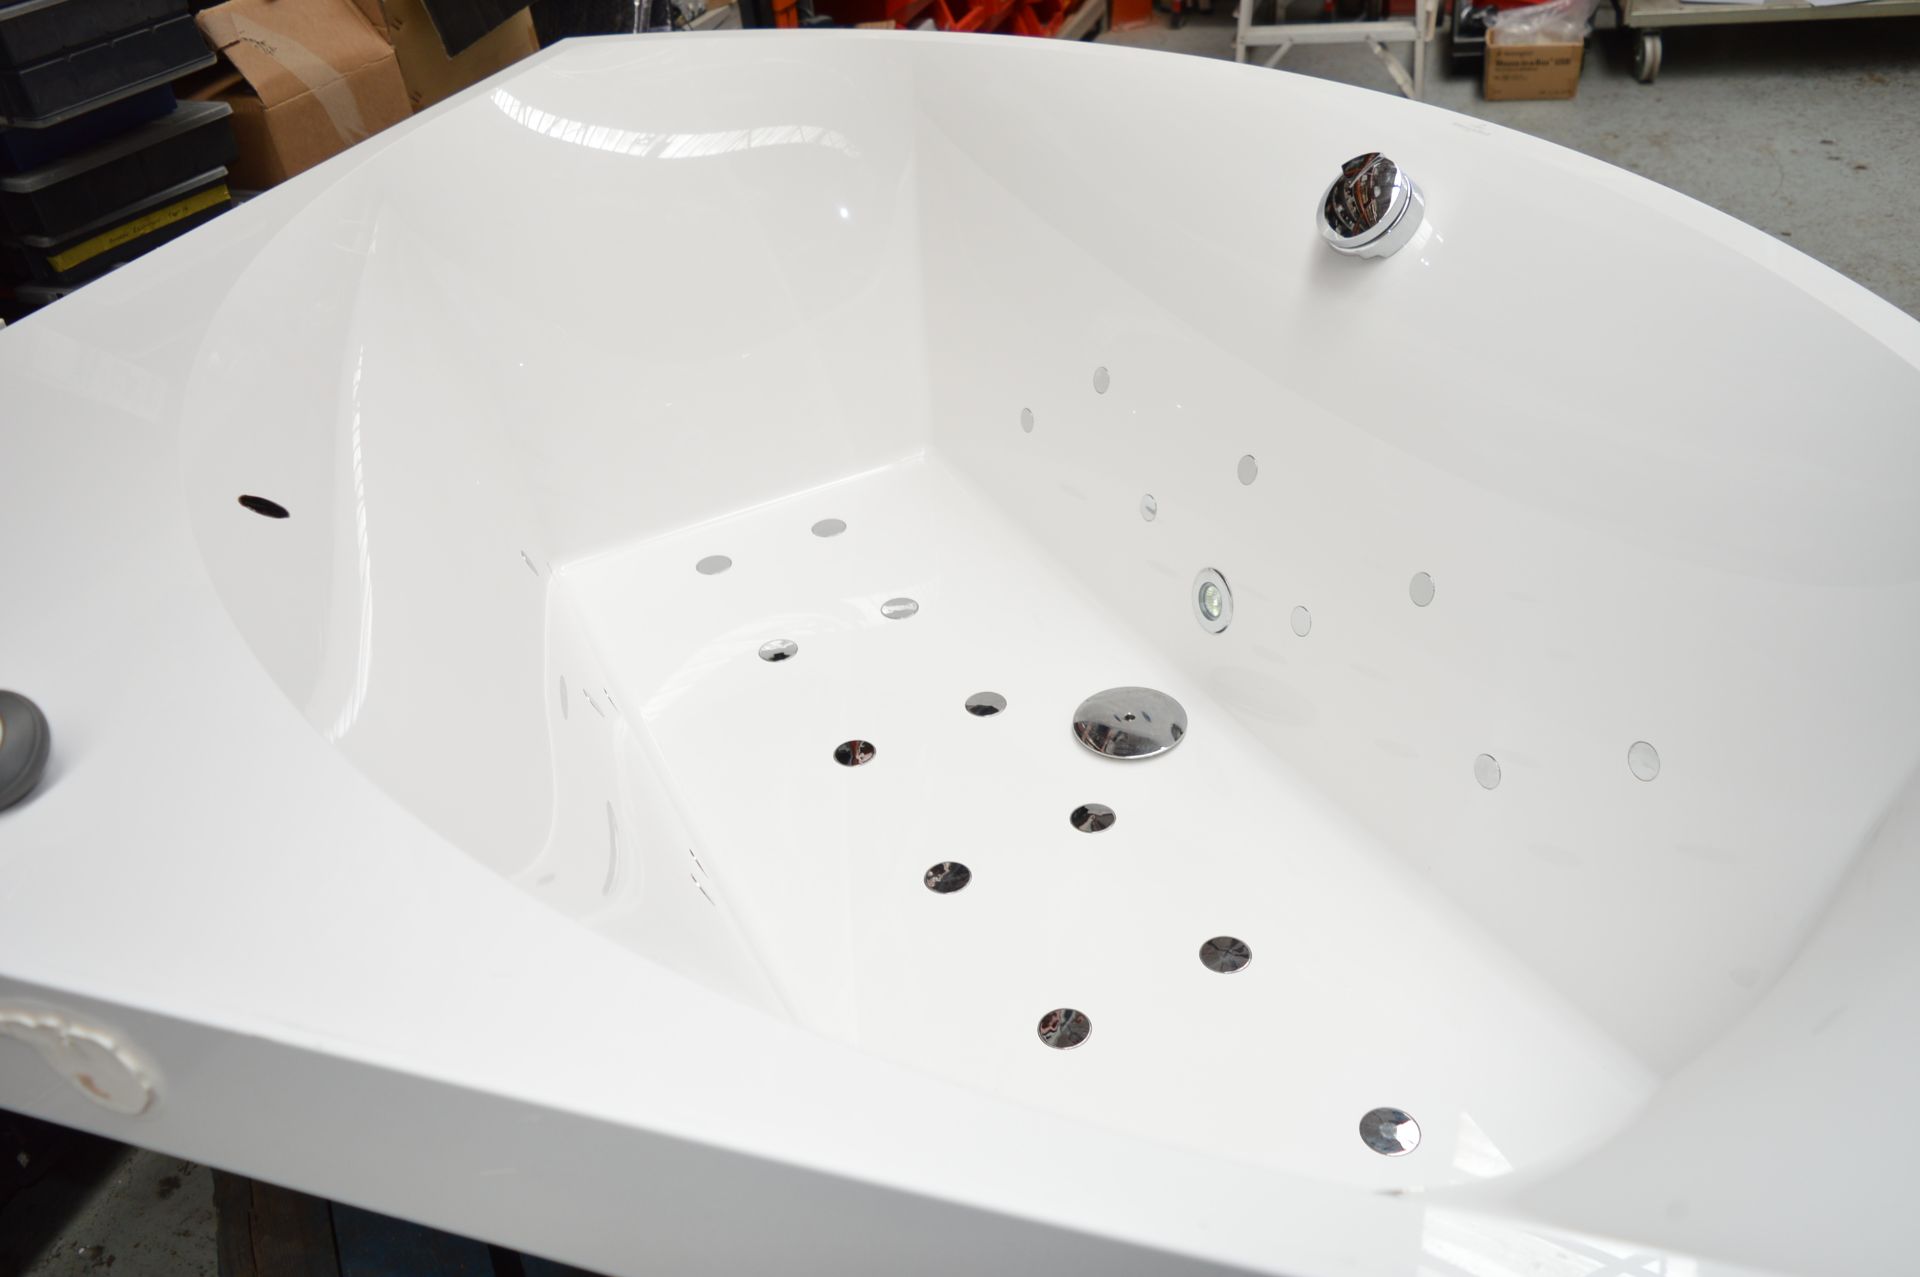 1 x Luxurious Villeroy & Boch Corner Whirlpool Bath - The Ultimate Fitness Combipool - Features 28 - Image 10 of 24